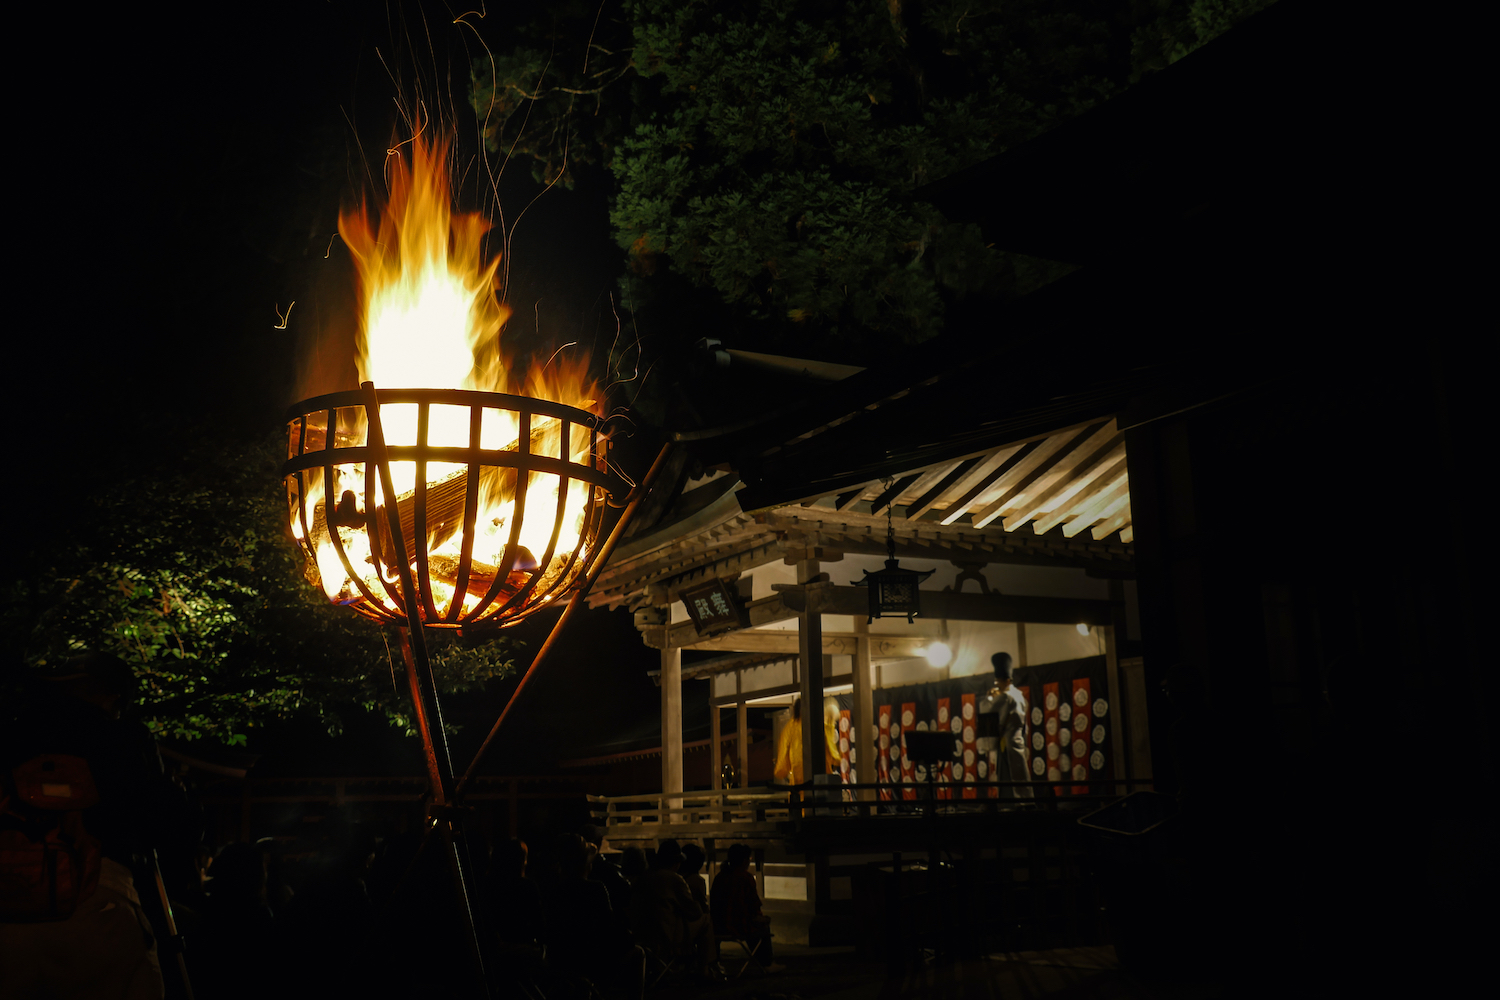 Bonfire and Noh stage